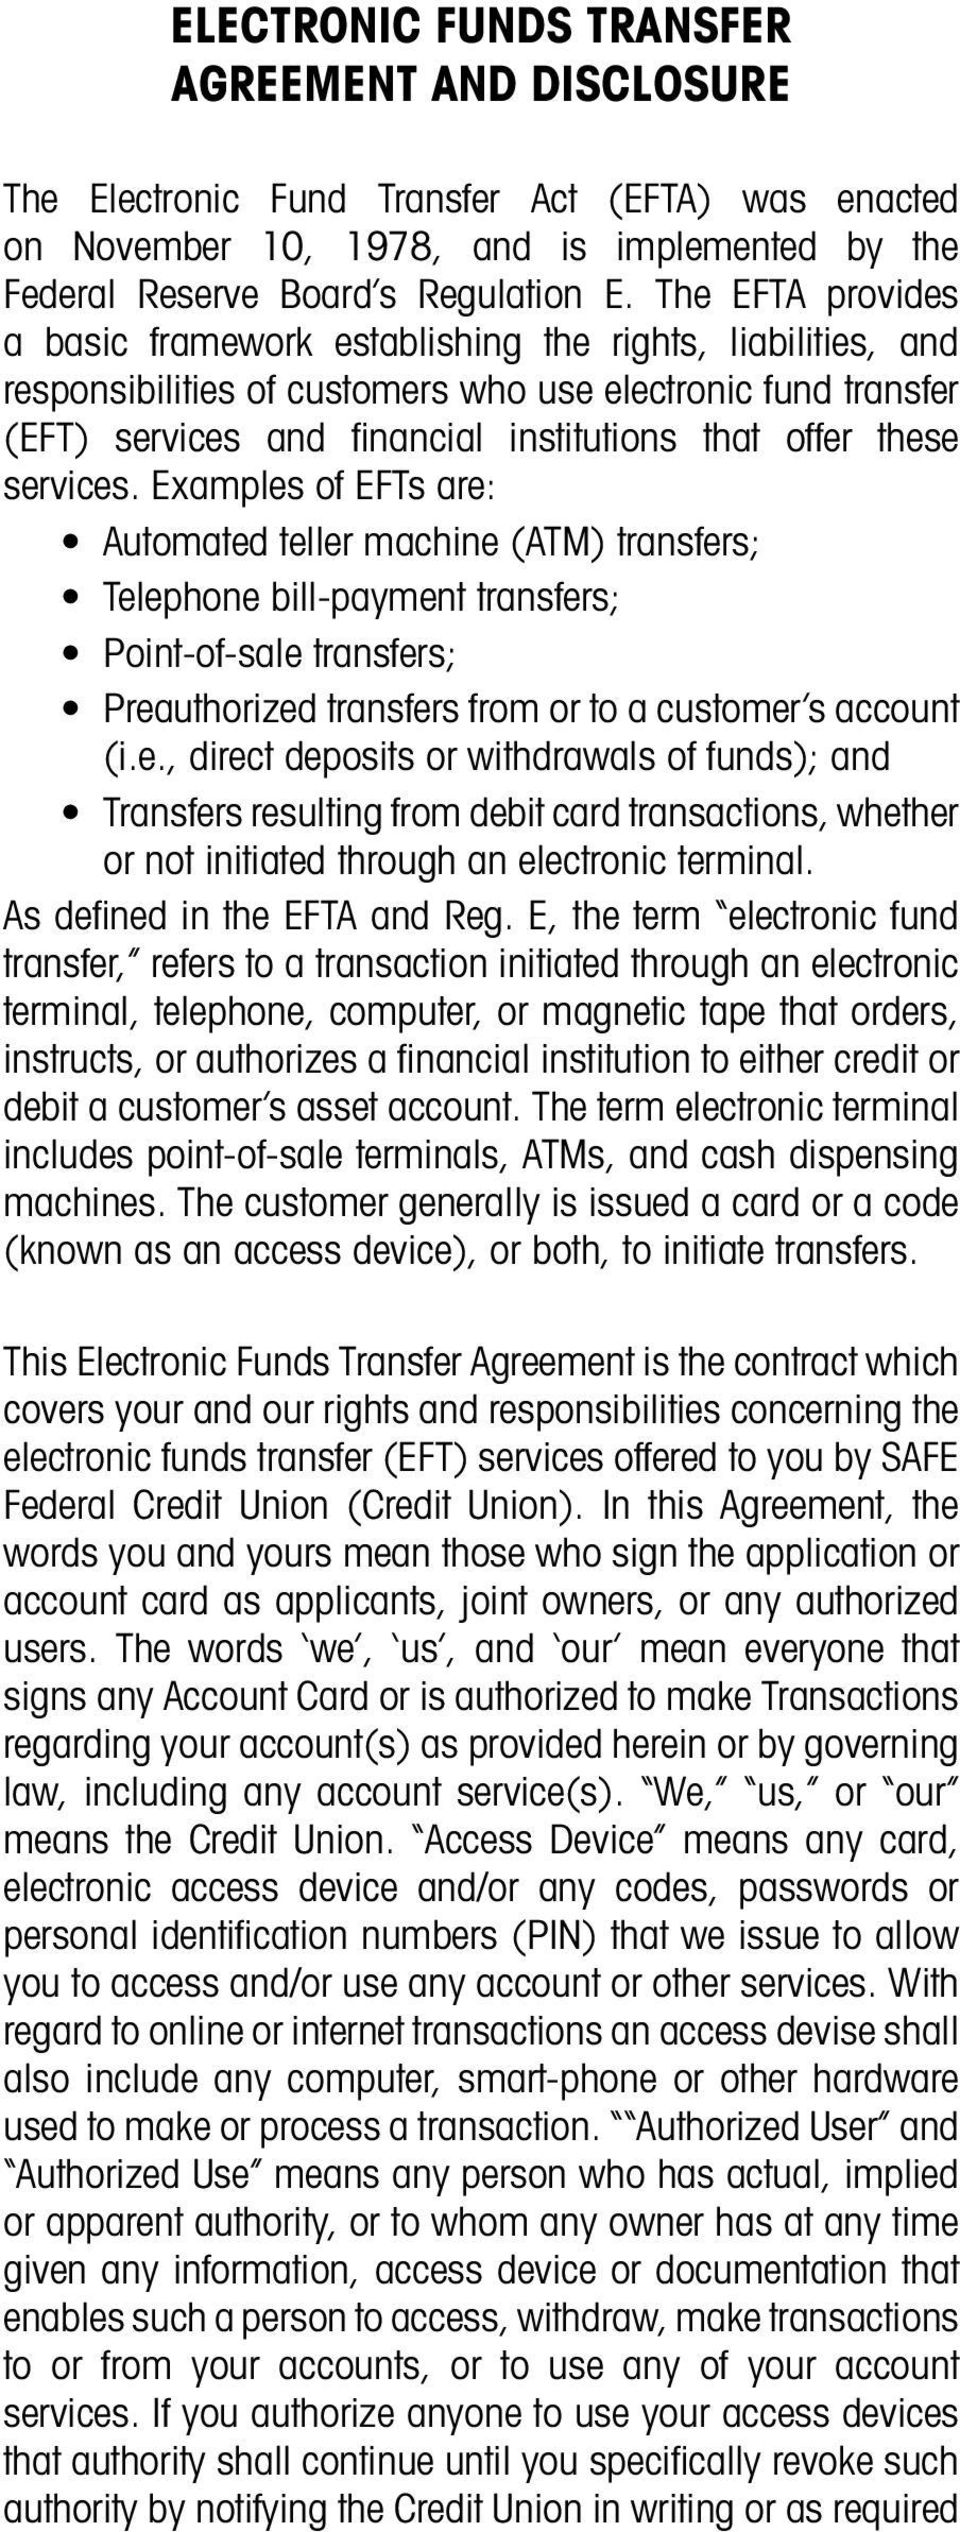 services. Examples of EFTs are: Automated teller machine (ATM) transfers; Telephone bill-payment transfers; Point-of-sale transfers; Preauthorized transfers from or to a customer s account (i.e., direct deposits or withdrawals of funds); and Transfers resulting from debit card transactions, whether or not initiated through an electronic terminal.